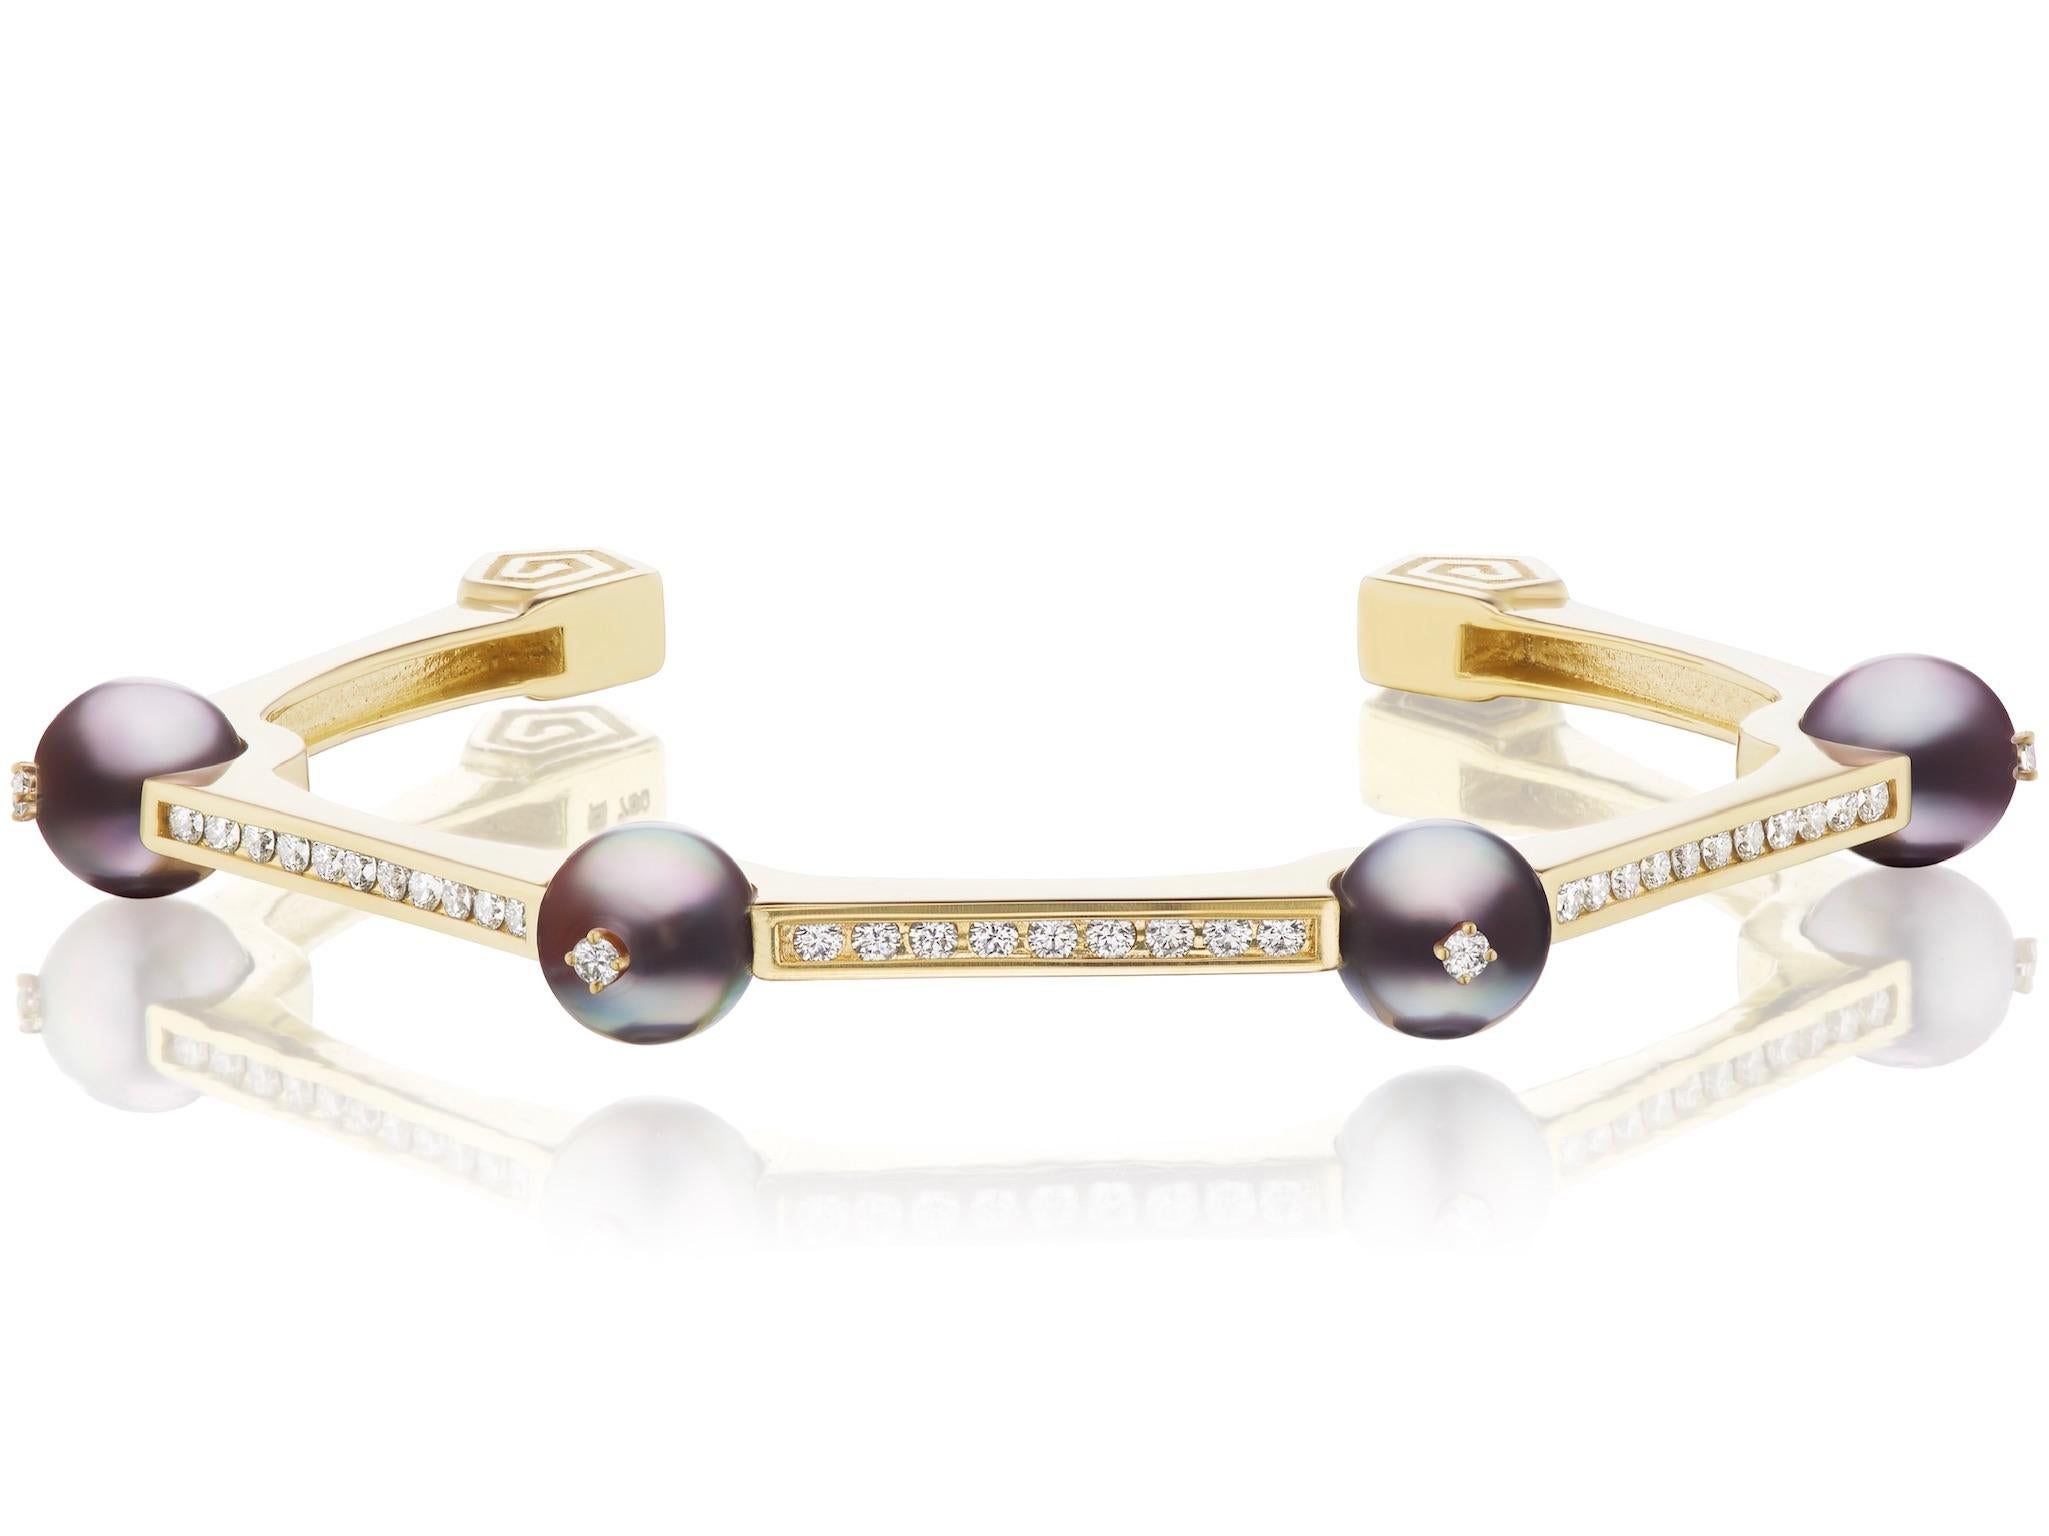 Four perfectly round 8.5mm Sea of Cortez Silver Grey Pearls make up this contemporary bracelet by Andrew Glassford.  It contains .76 carats of G/H VSI round diamonds between the pearls and is fashioned as a bangle with 45 degree angles all around